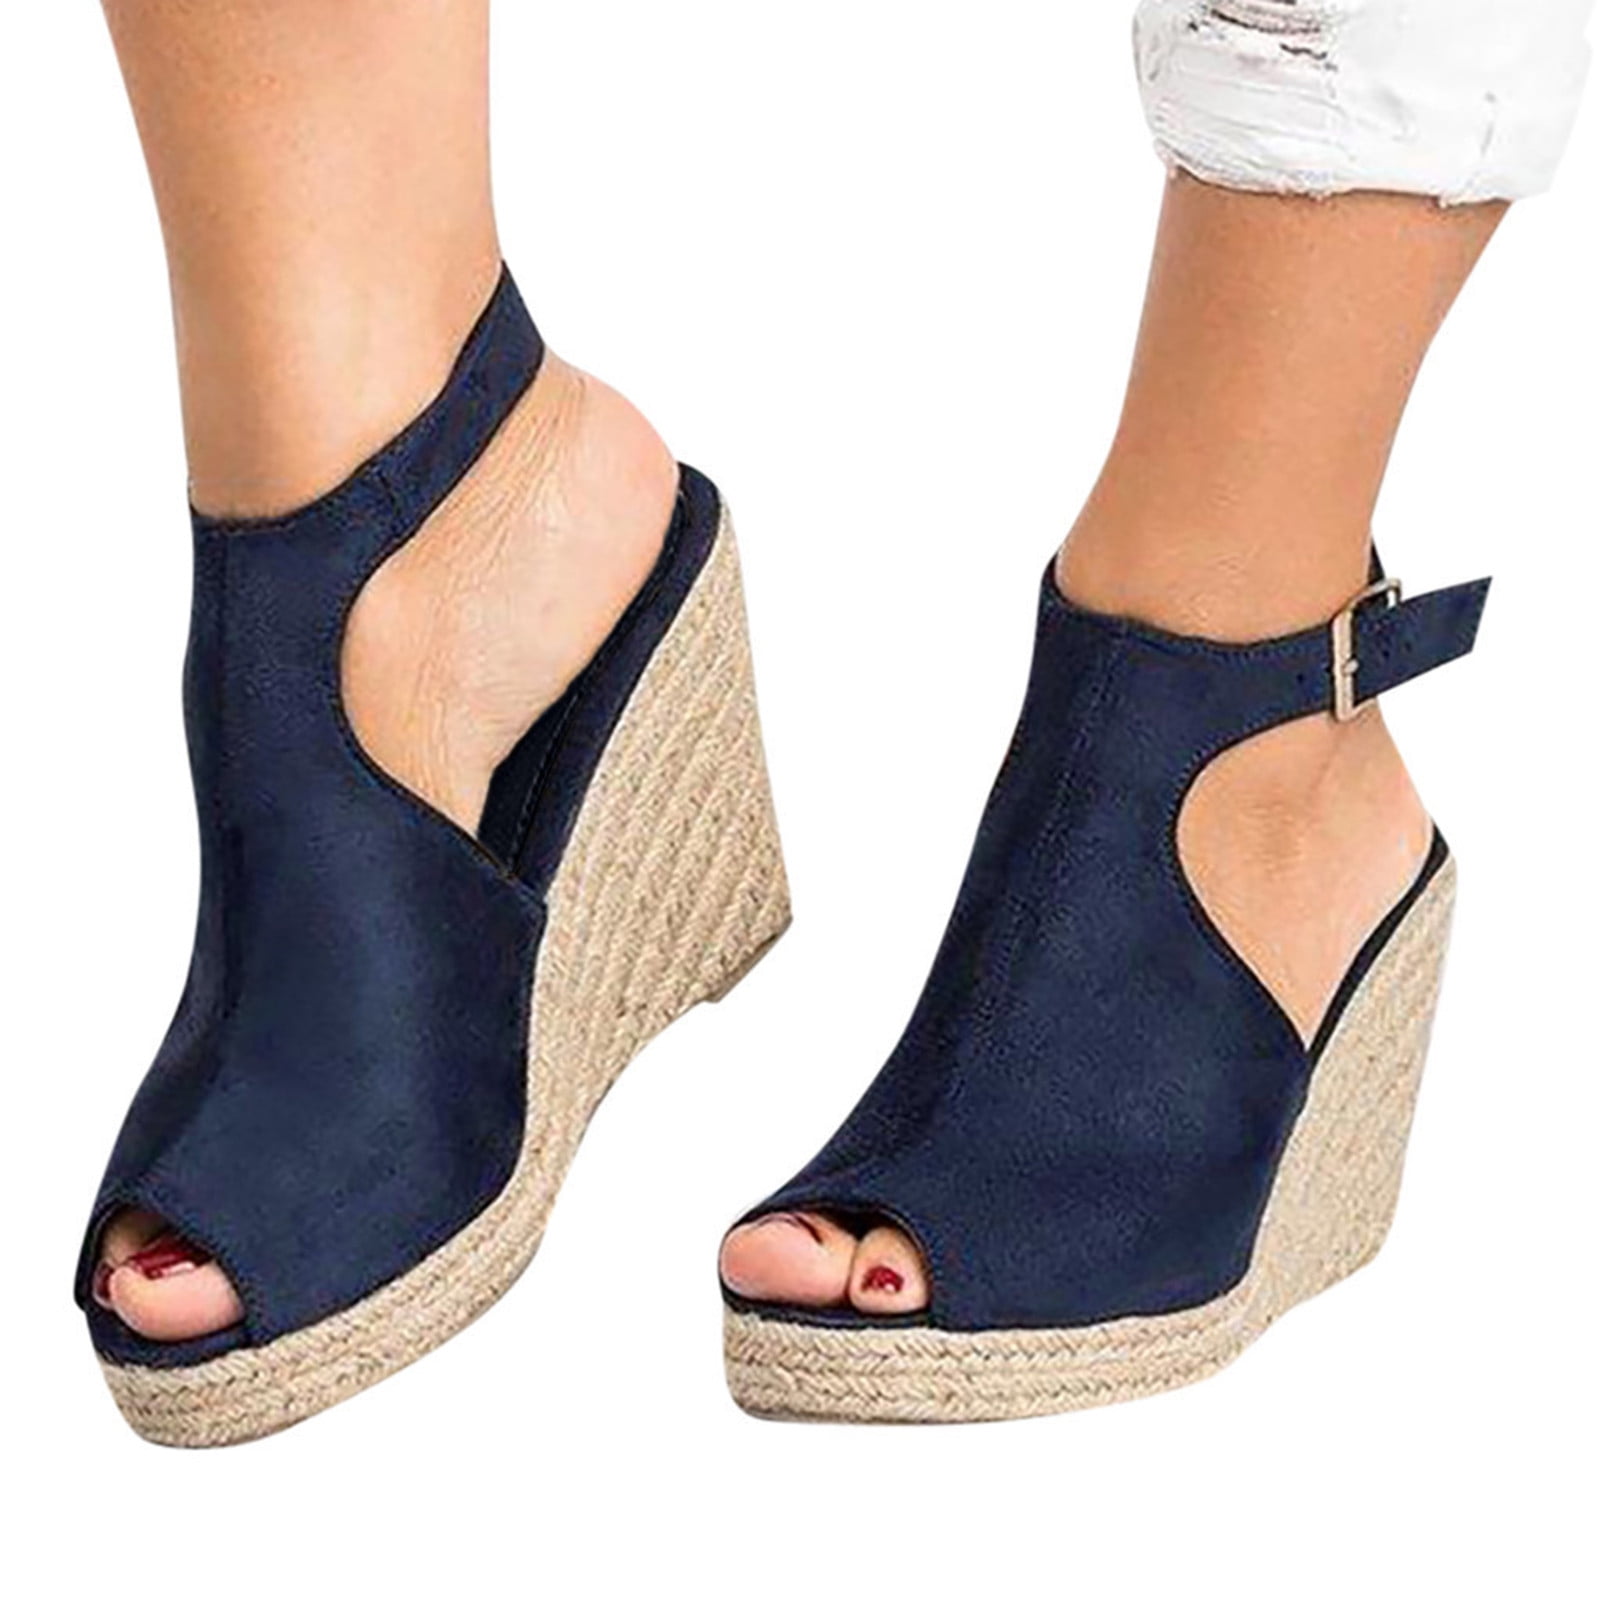 Platform Sandals for Women Fashion Solid Open Toe Wedges Heeled Ankle Buckle Strap Summer Casual Roman Shoes Sandals